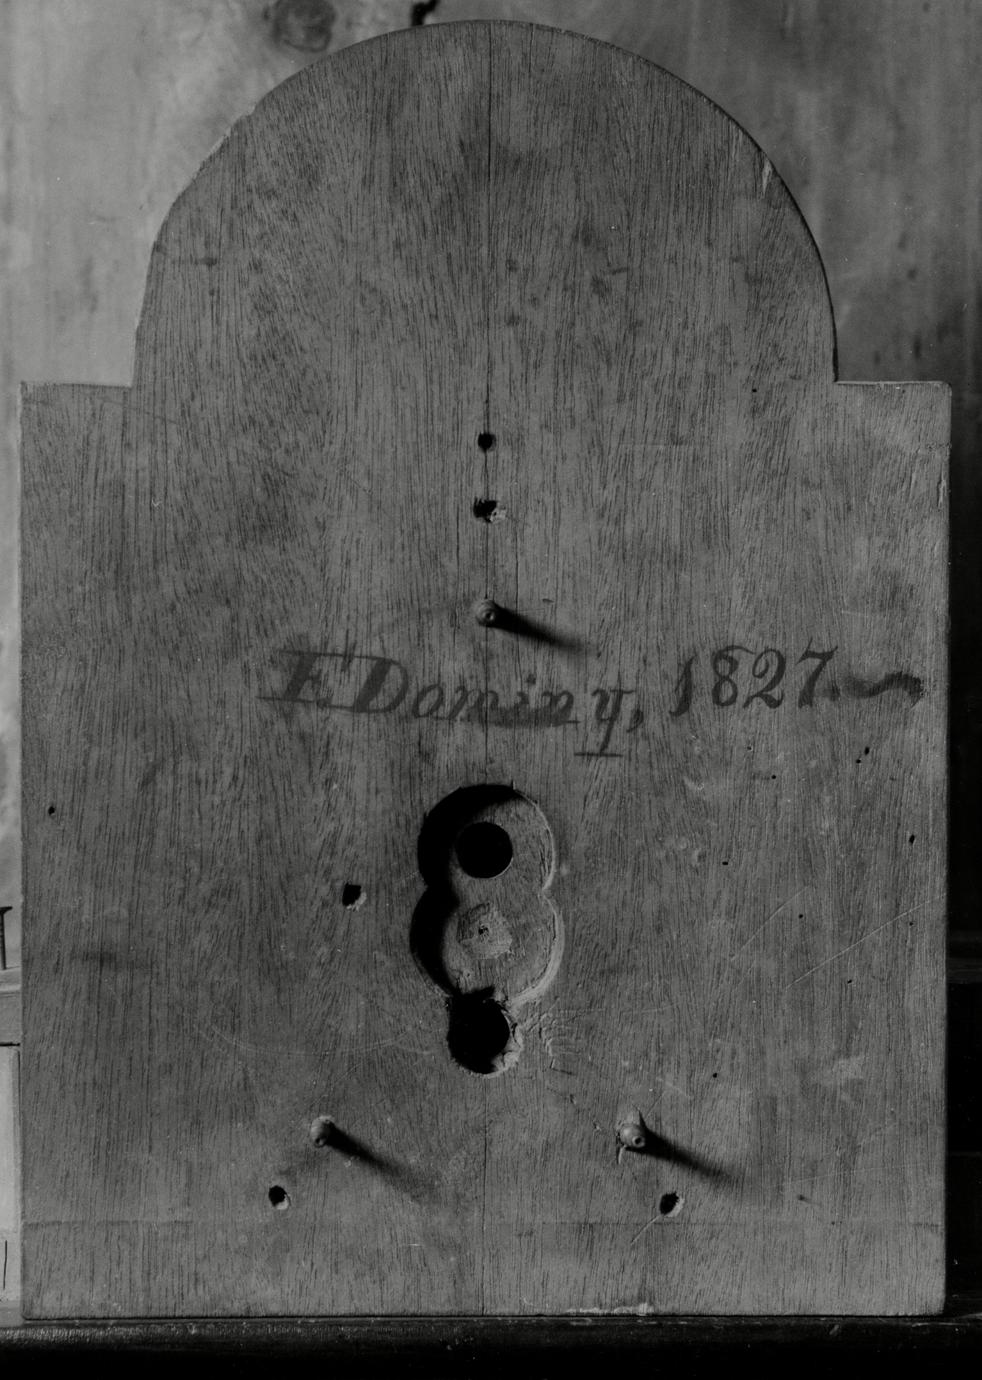 Black and white photograph of Felix Dominy's signature and date on a silent clock.